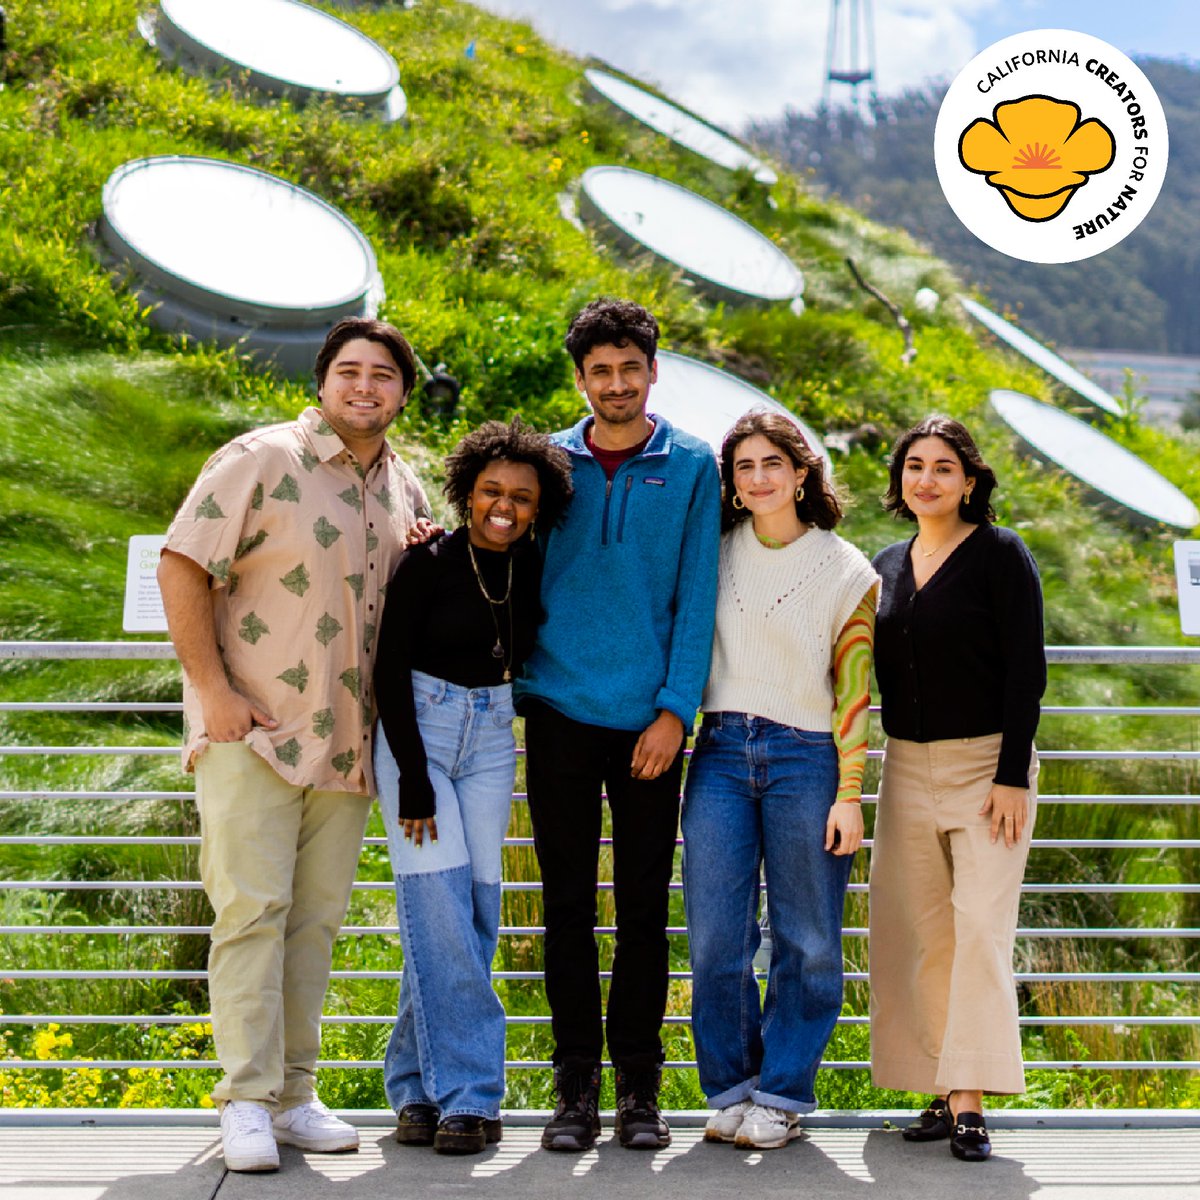 We’re thrilled to welcome our first-ever cohort of California Creators for Nature! Meet (left to right) Kaua Hermosura, Dezz McGill, Vishal Subramanyan, Chloé Stowell, & Kiana Kazemi: bit.ly/3JmKCtF